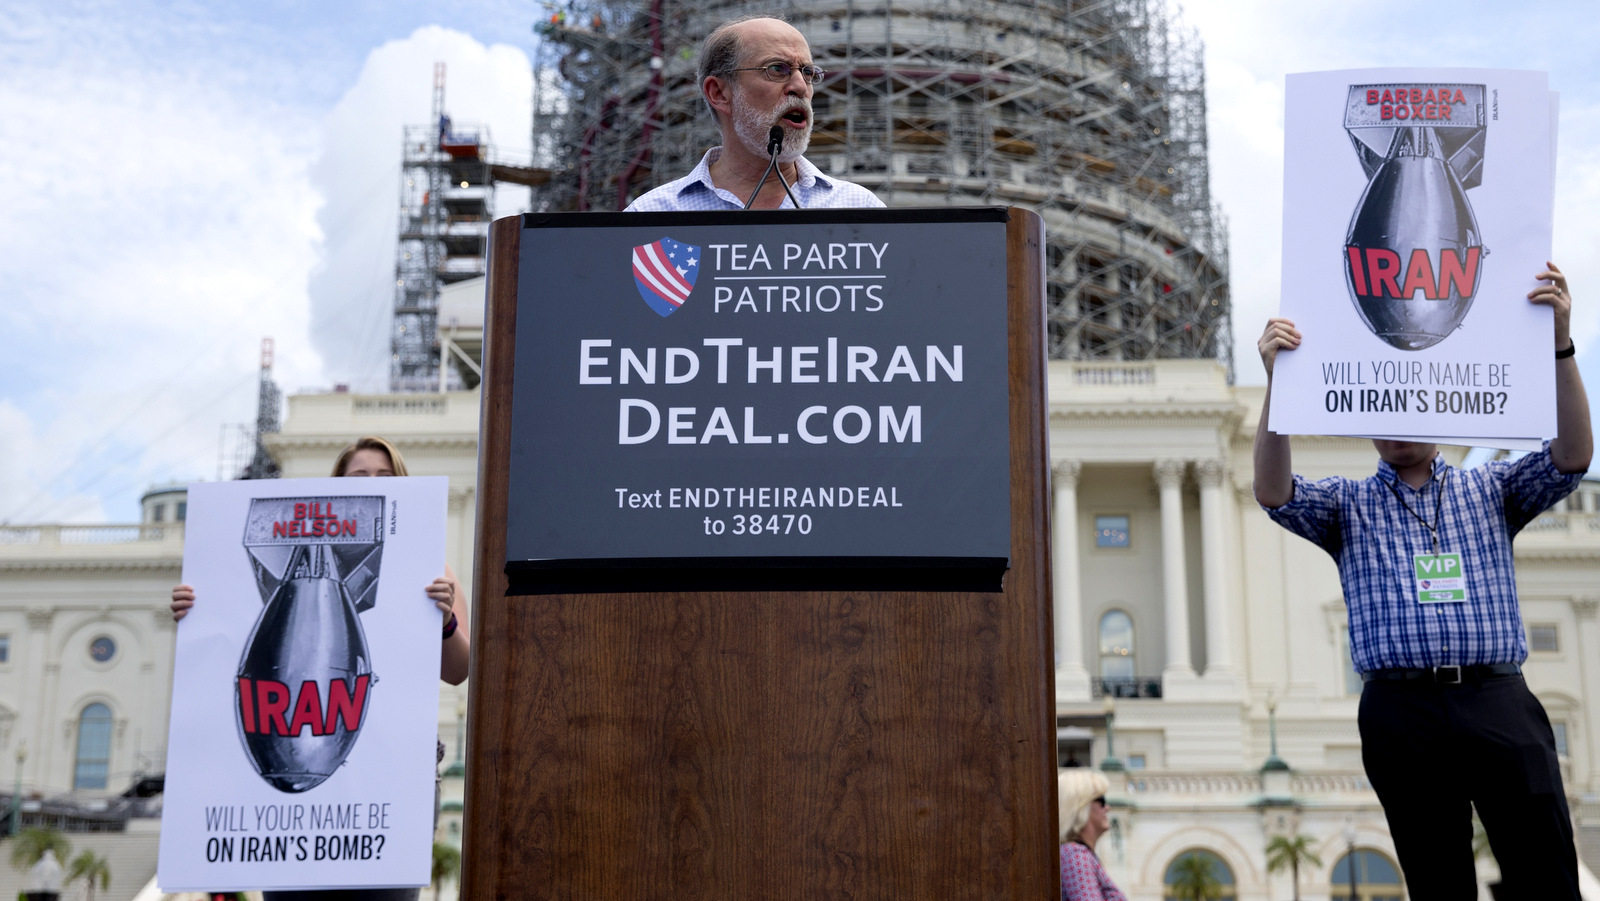 Frank Gaffney, founder and CEO of the Center for Security Policy, speaks during a rally organized by Tea Party Patriots in on Capitol Hill in Washington, Wednesday, Sept. 9, 2015, to oppose the Iran nuclear agreement. (AP Photo/Carolyn Kaster)